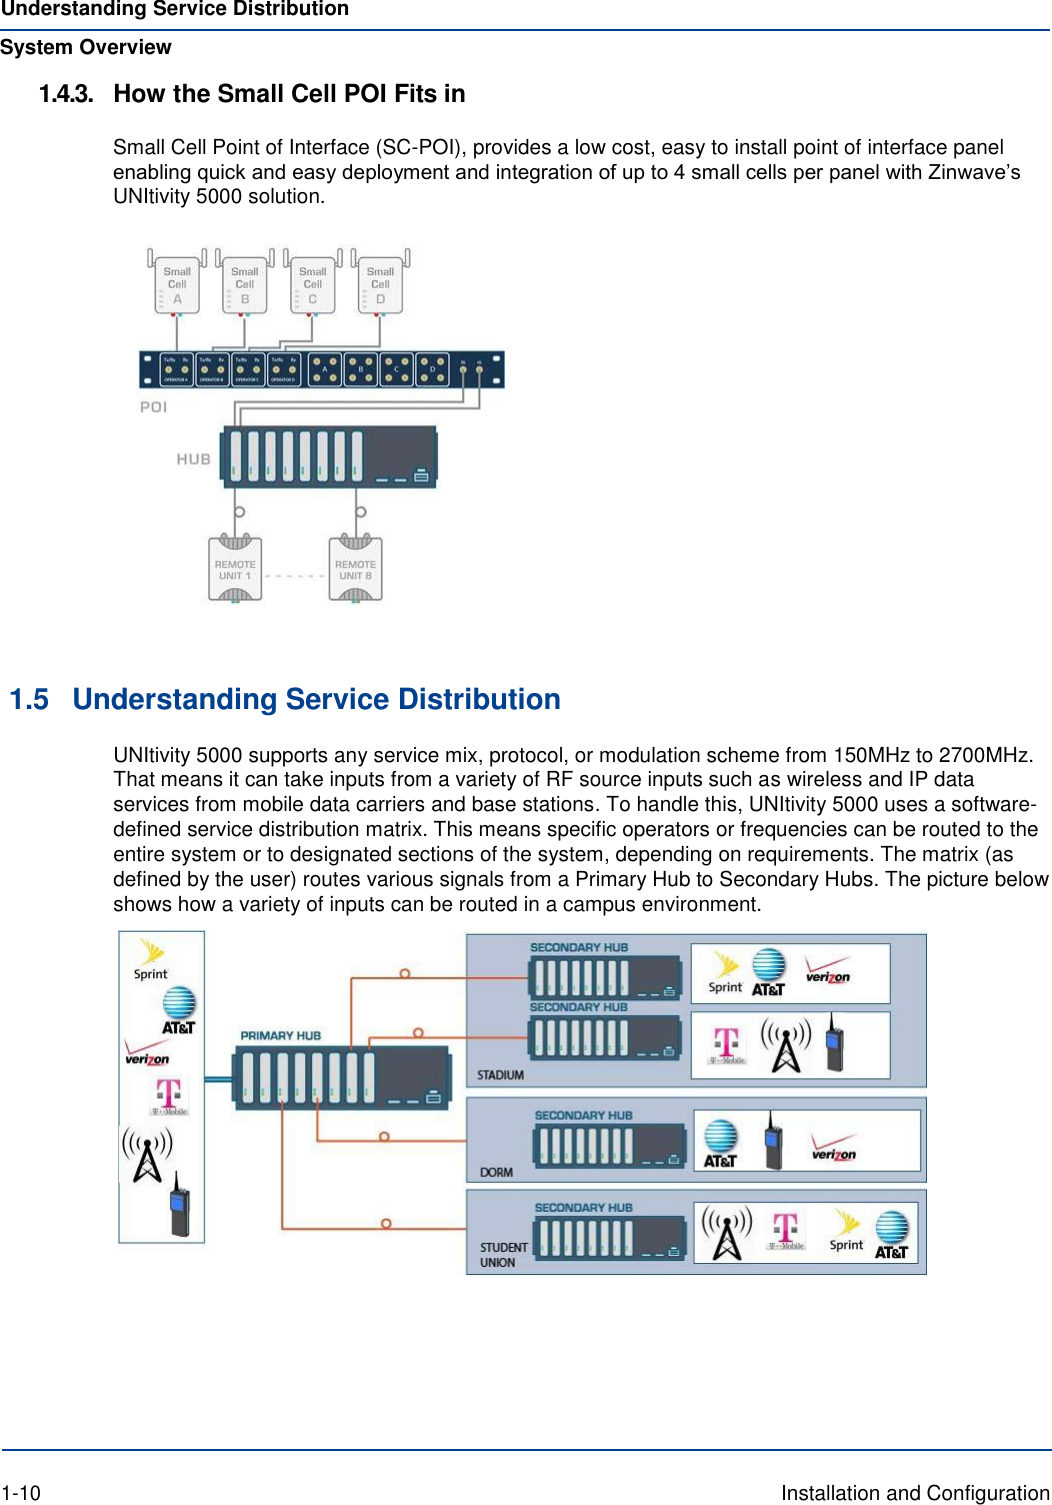 Understanding Service Distribution System Overview 1.4.3.  How the Small Cell POI Fits in  Small Cell Point of Interface (SC-POI), provides a low cost, easy to install point of interface panel enabling quick and easy deployment and integration of up to 4 small cells per panel with Zinwave’s UNItivity 5000 solution.     1.5  Understanding Service Distribution UNItivity 5000 supports any service mix, protocol, or modulation scheme from 150MHz to 2700MHz. That means it can take inputs from a variety of RF source inputs such as wireless and IP data services from mobile data carriers and base stations. To handle this, UNItivity 5000 uses a software-defined service distribution matrix. This means specific operators or frequencies can be routed to the entire system or to designated sections of the system, depending on requirements. The matrix (as defined by the user) routes various signals from a Primary Hub to Secondary Hubs. The picture below shows how a variety of inputs can be routed in a campus environment.         1-10 Installation and Configuration 